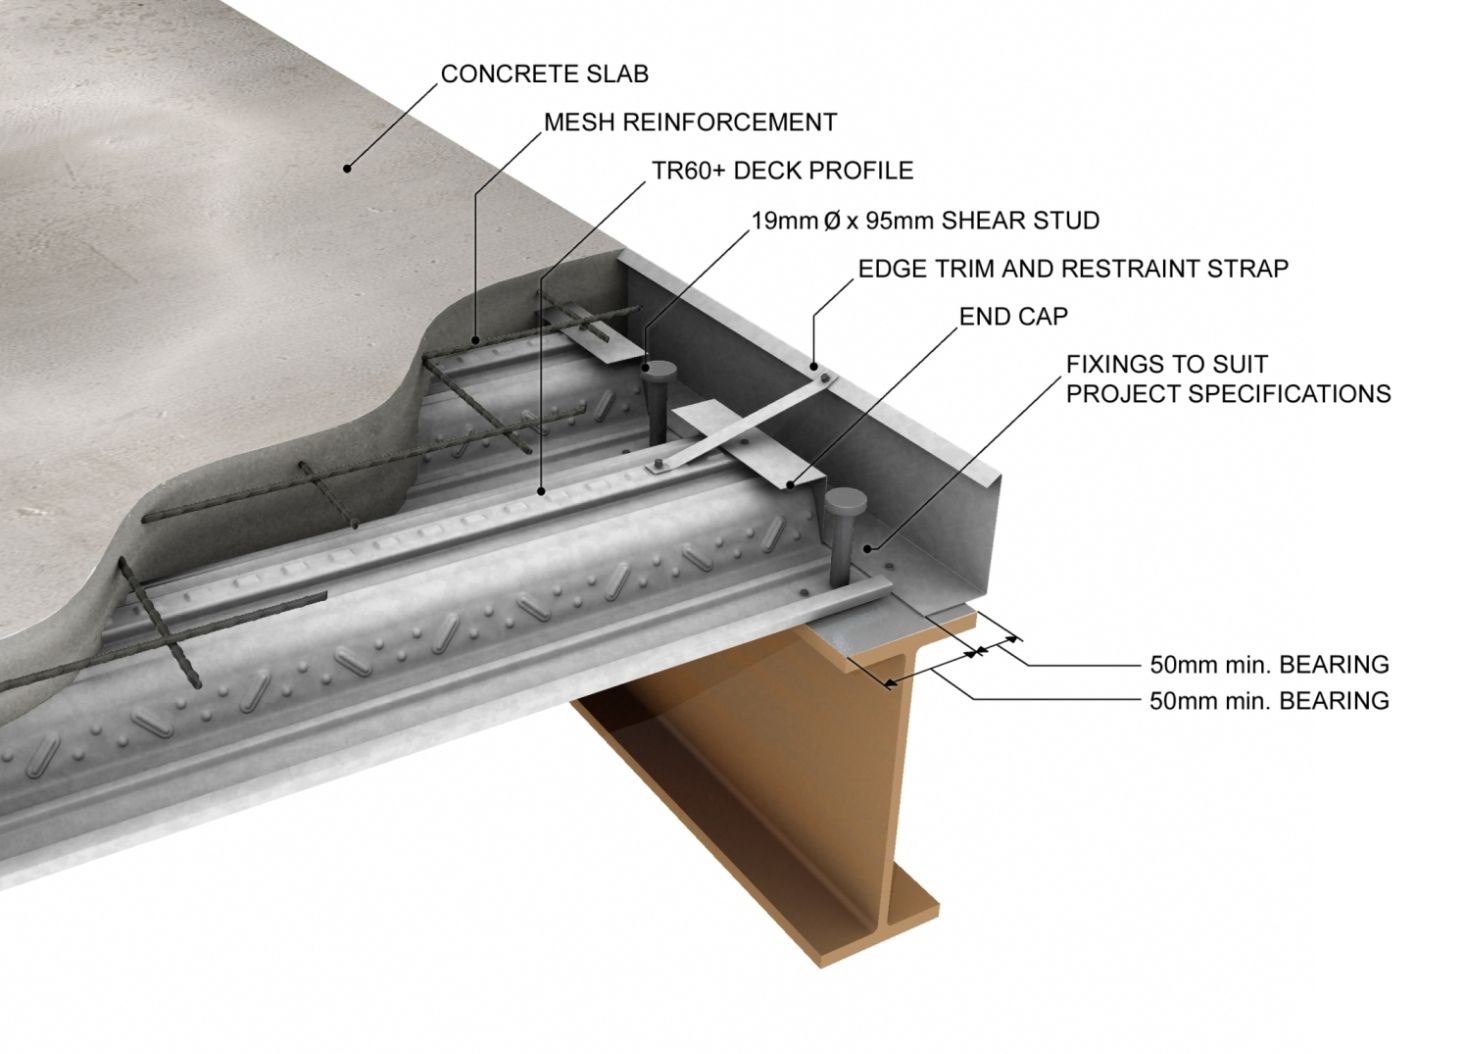 Stl Angle At Roof Deck for sizing 1465 X 1054